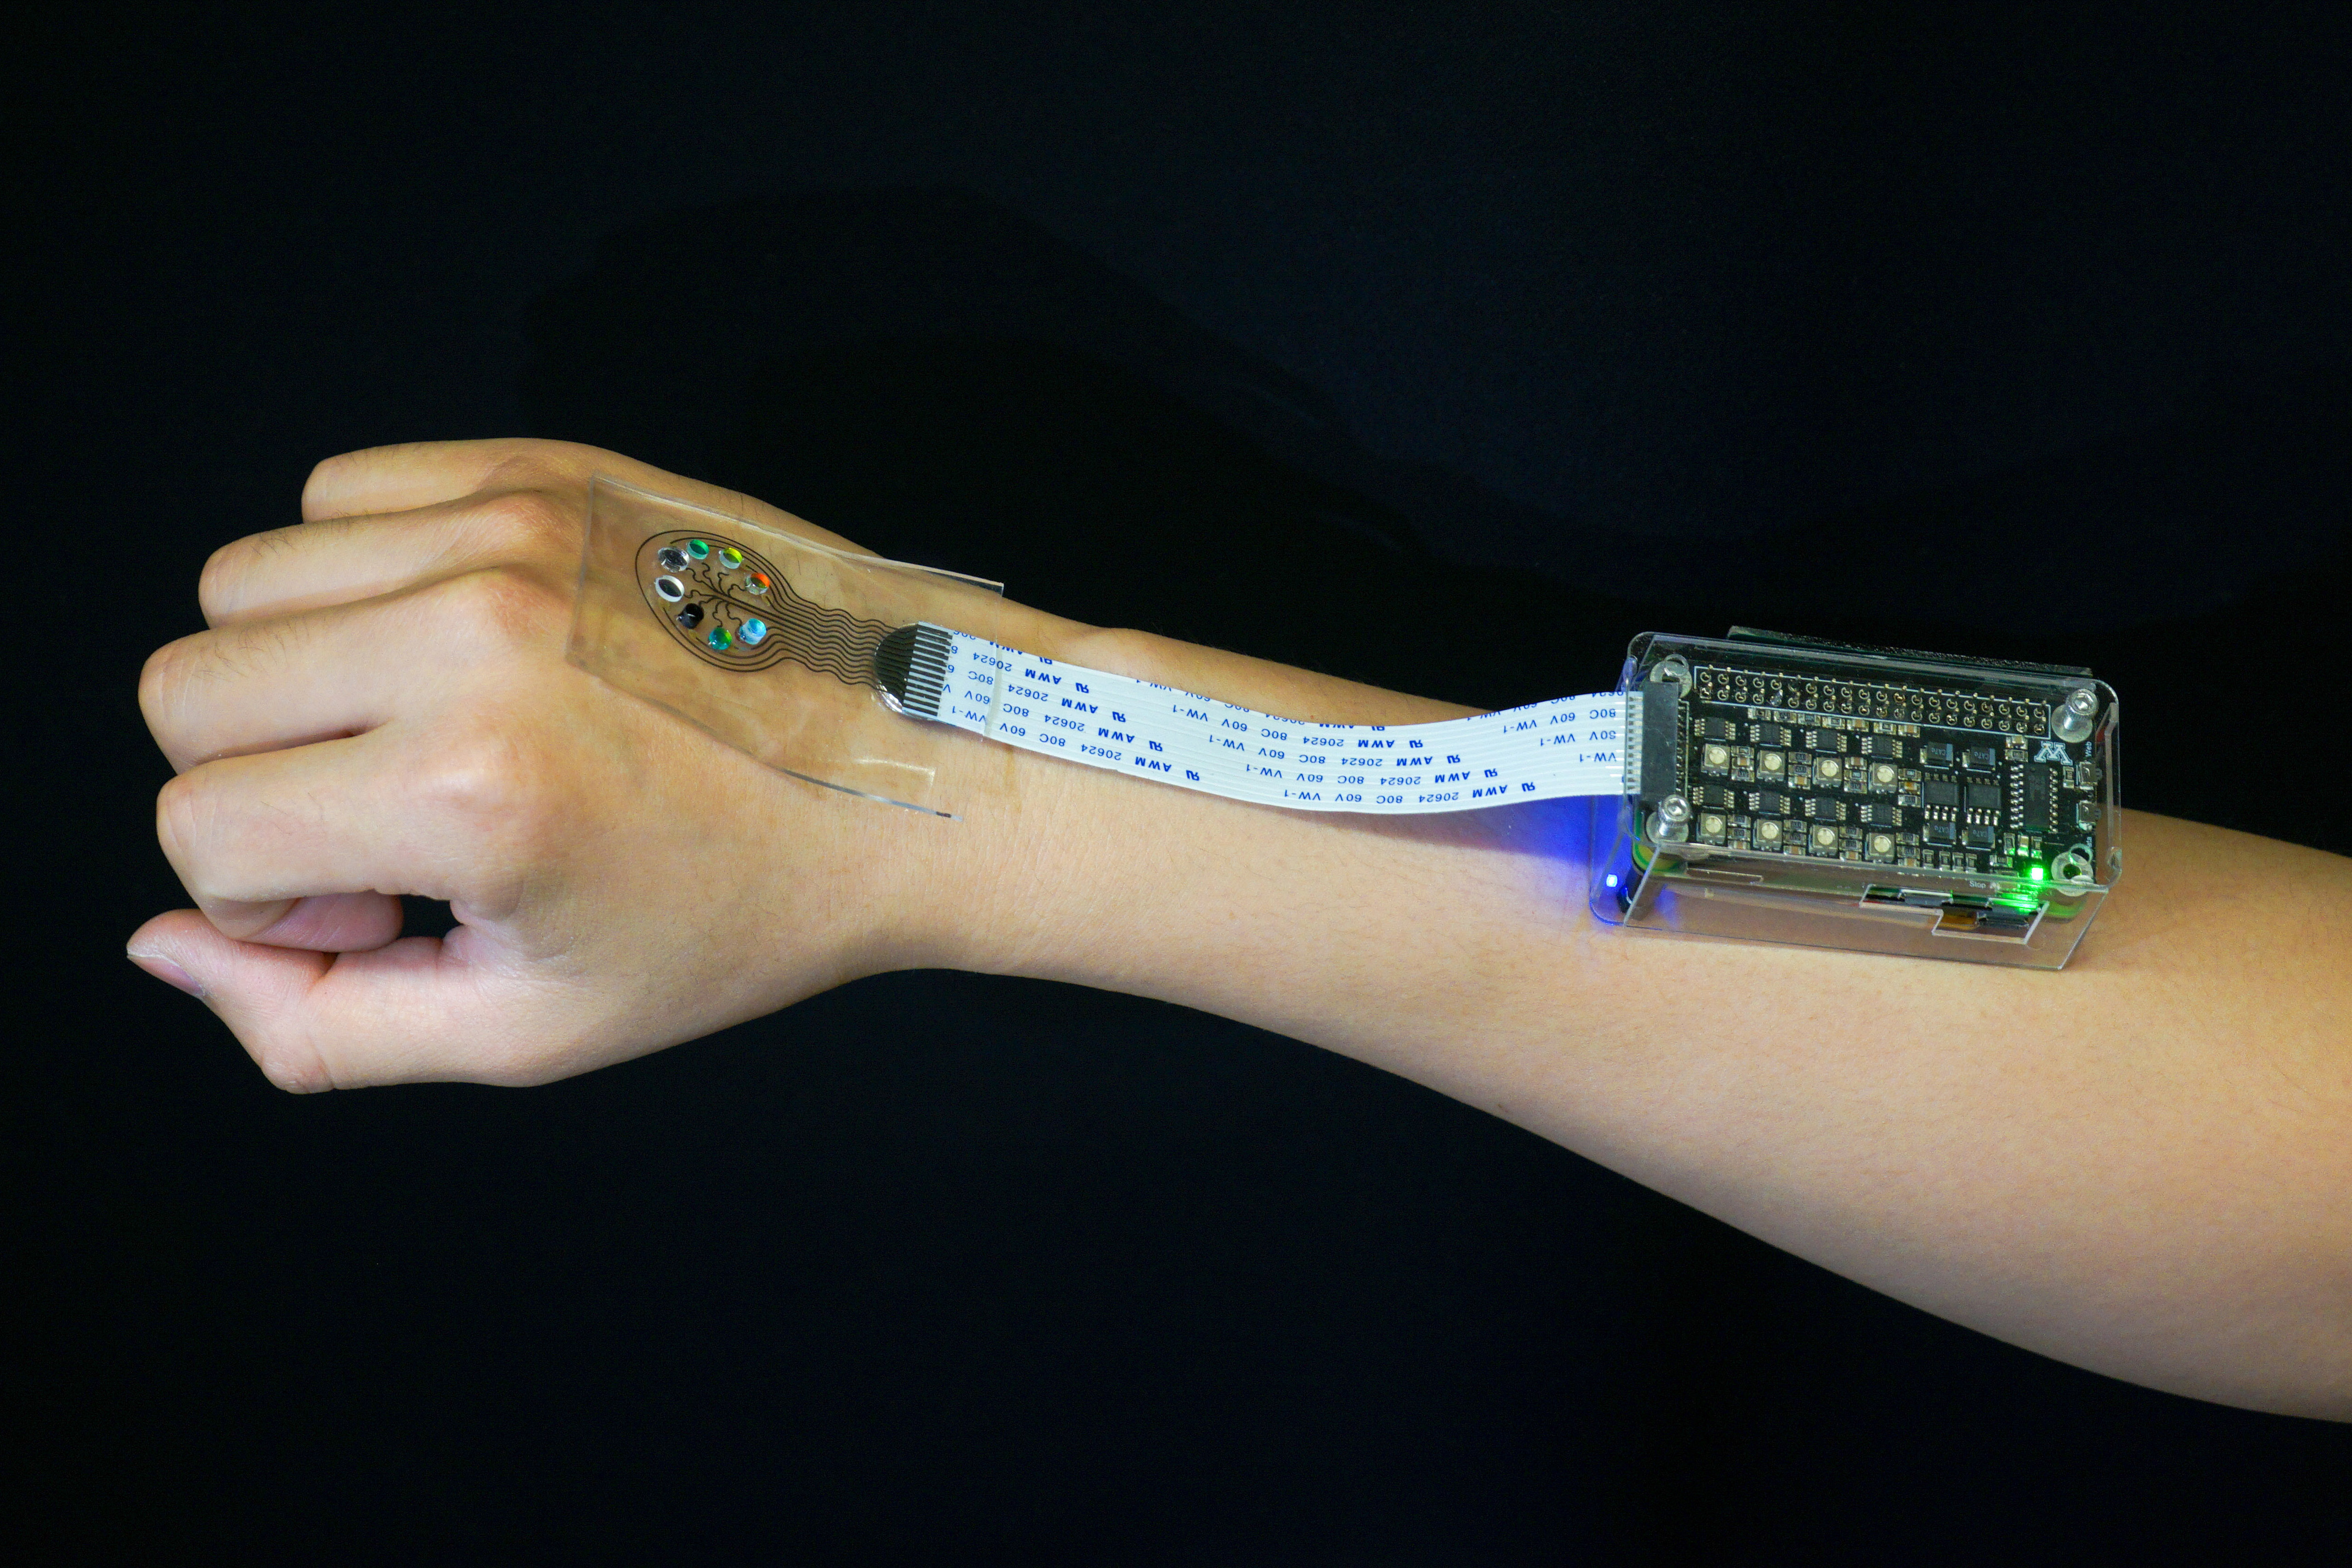 Human arm with light-sensing device attached